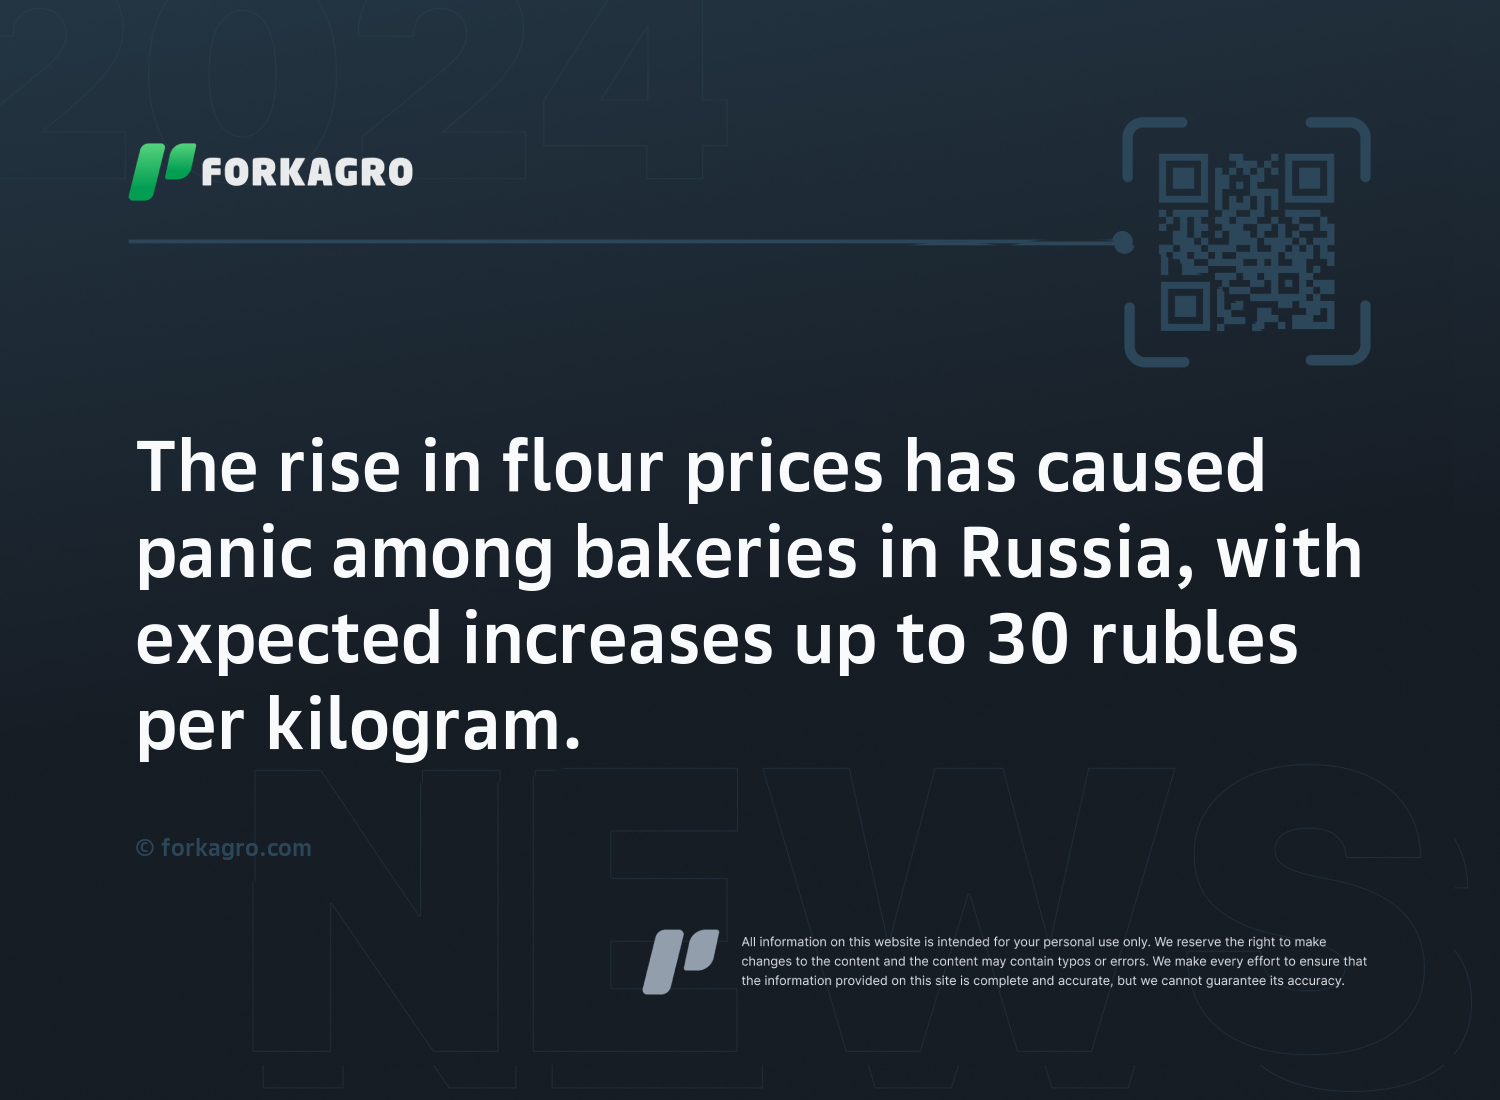 The rise in flour prices has caused panic among bakeries in Russia, with expected increases up to 30 rubles per kilogram.